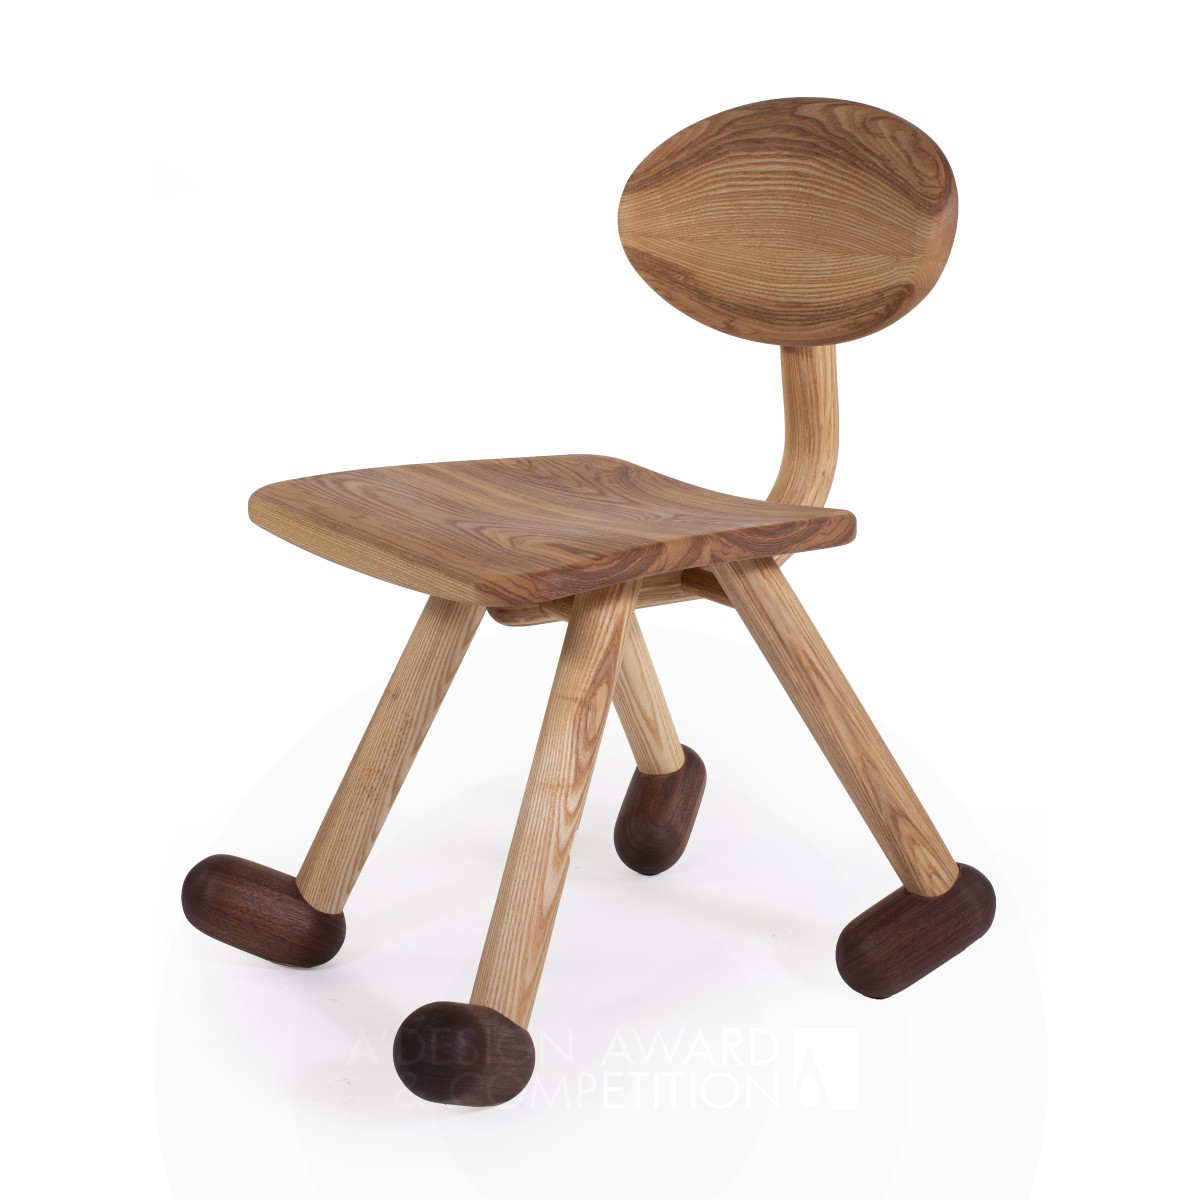 Walky Chair